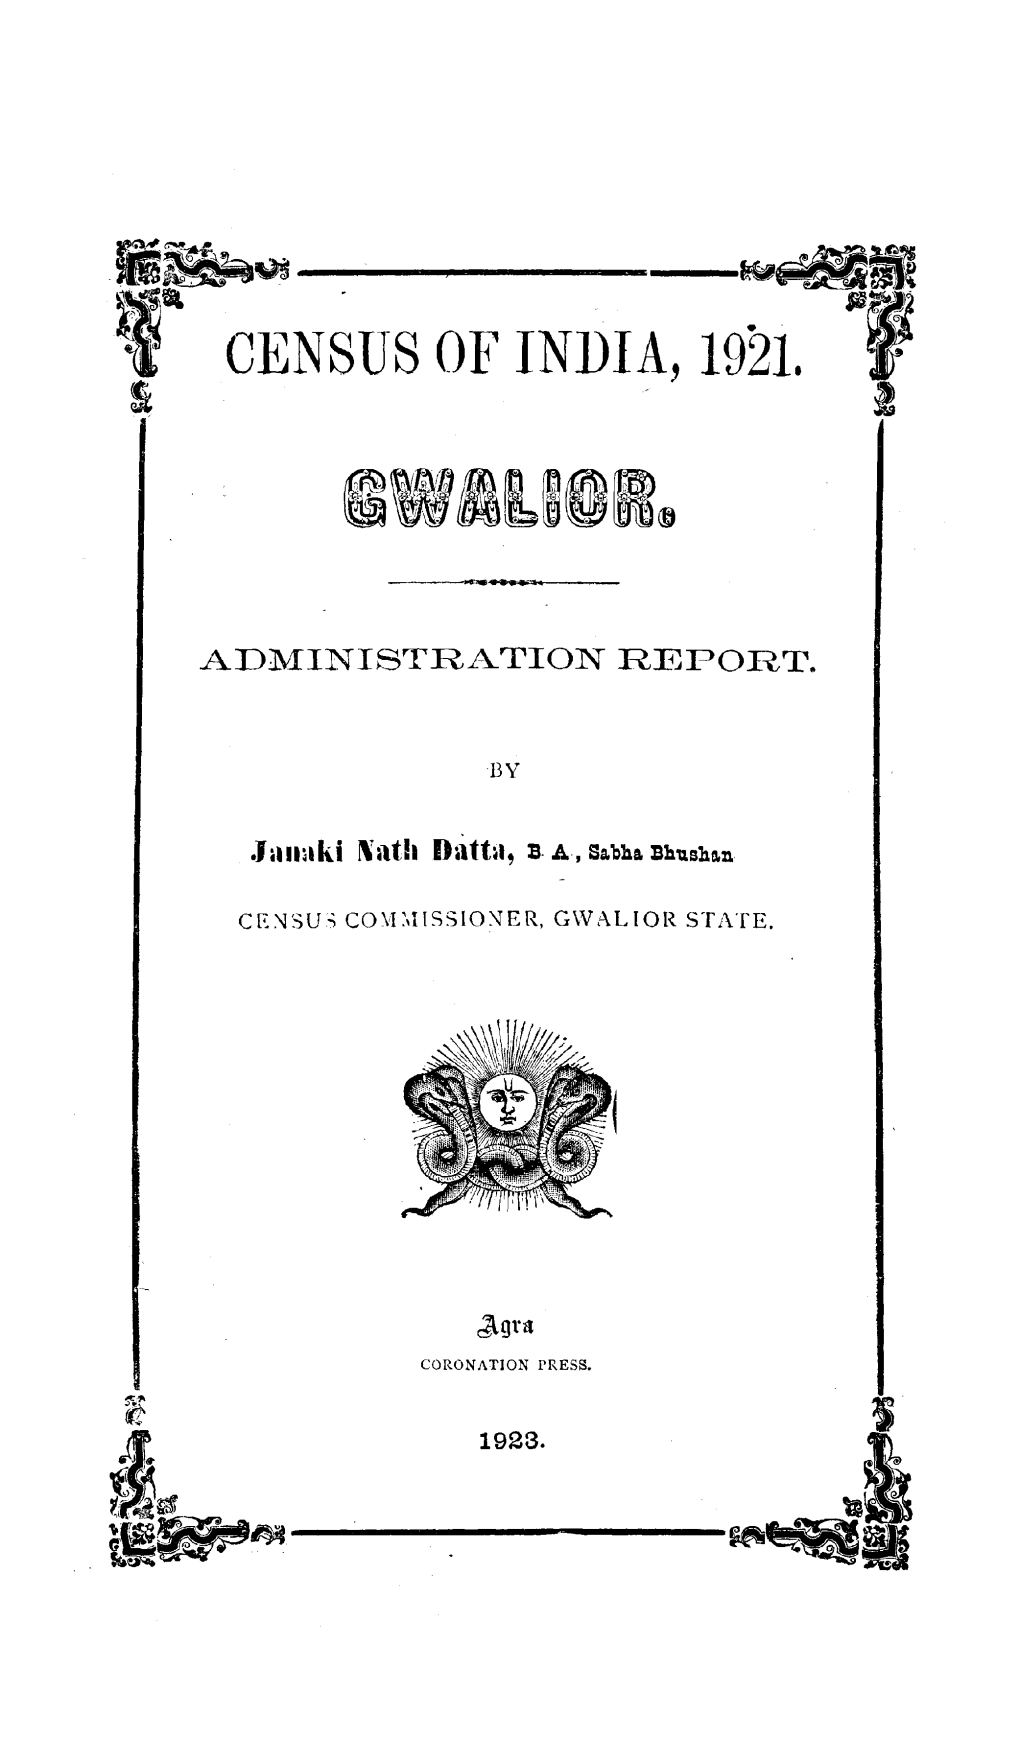 Gwalior, Administration Report